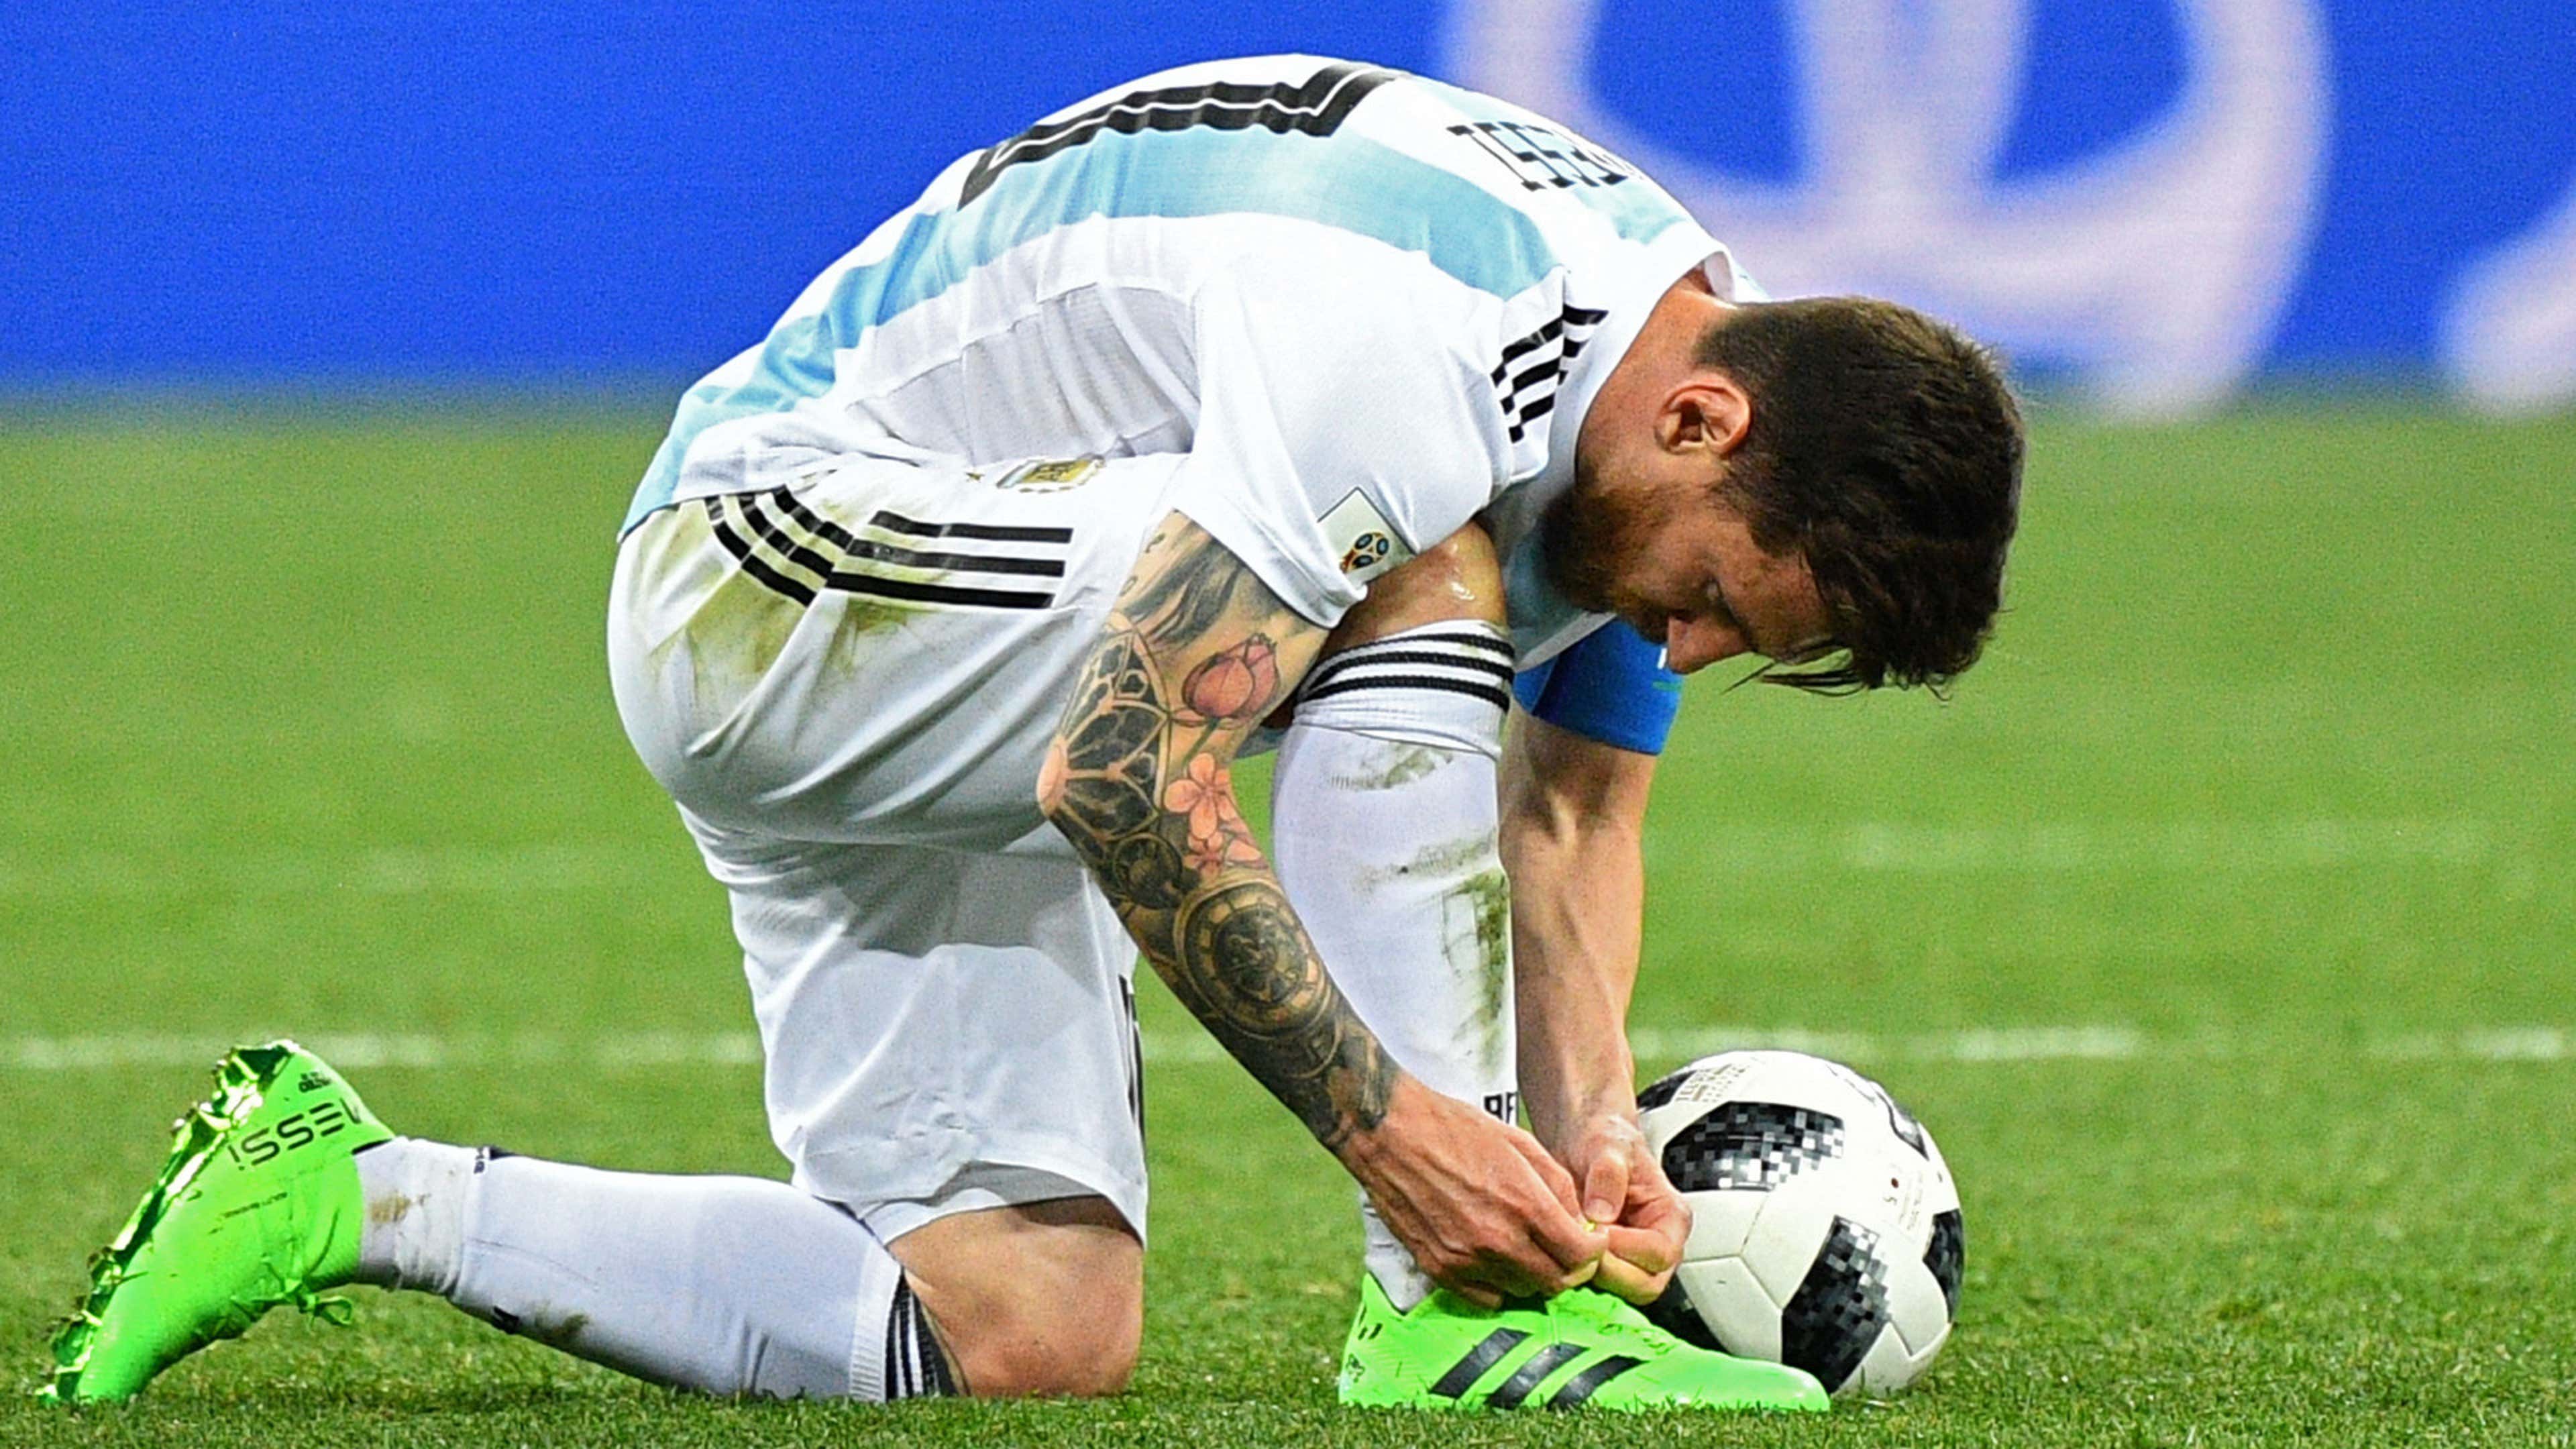 Lionel Messi (Argentina) with Adidas Brazuca, official match ball